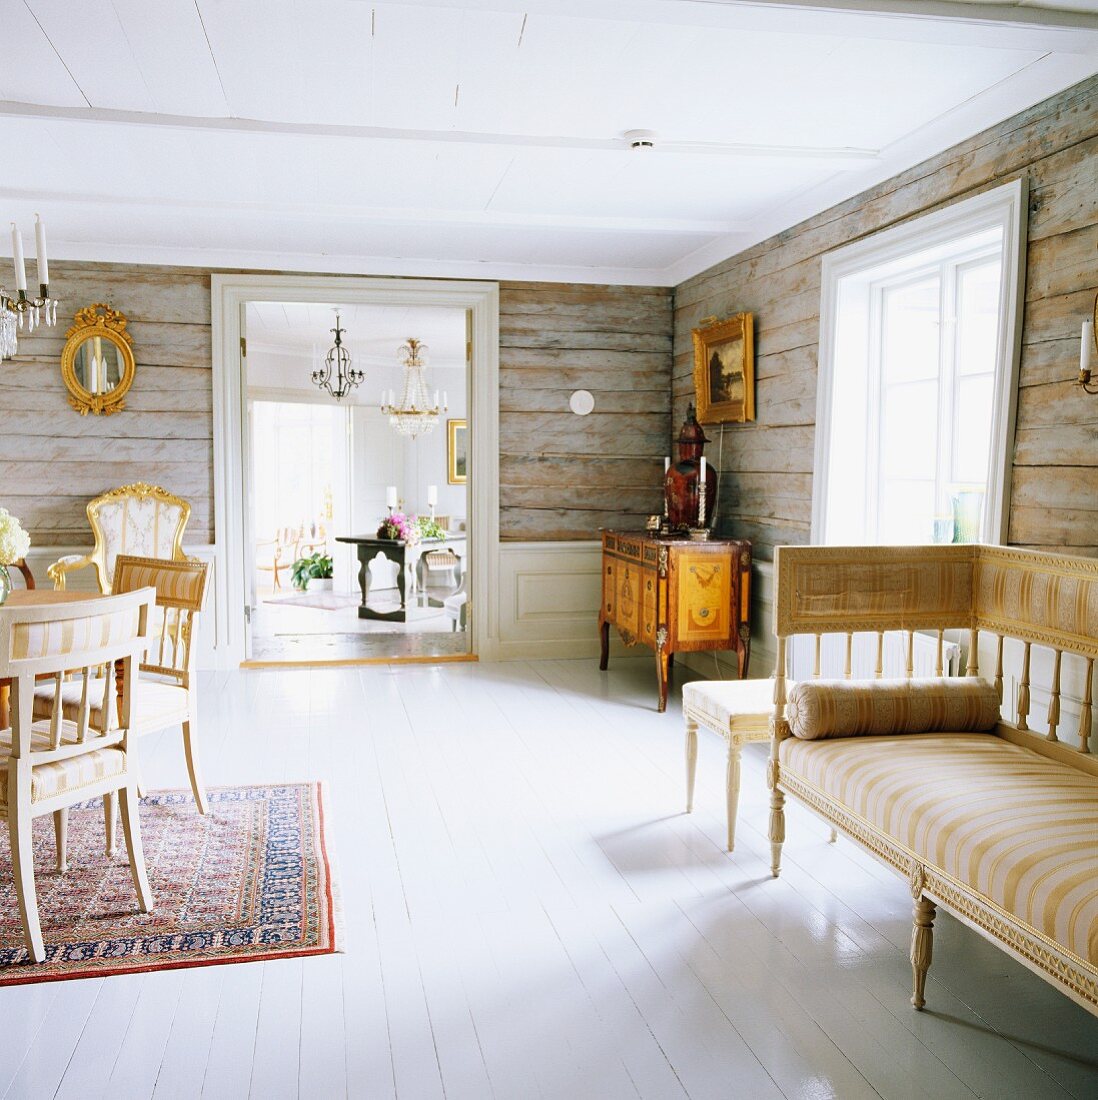 Connected rooms in old, Swedish, wooden house with original, rustic wooden walls and antique furnishings